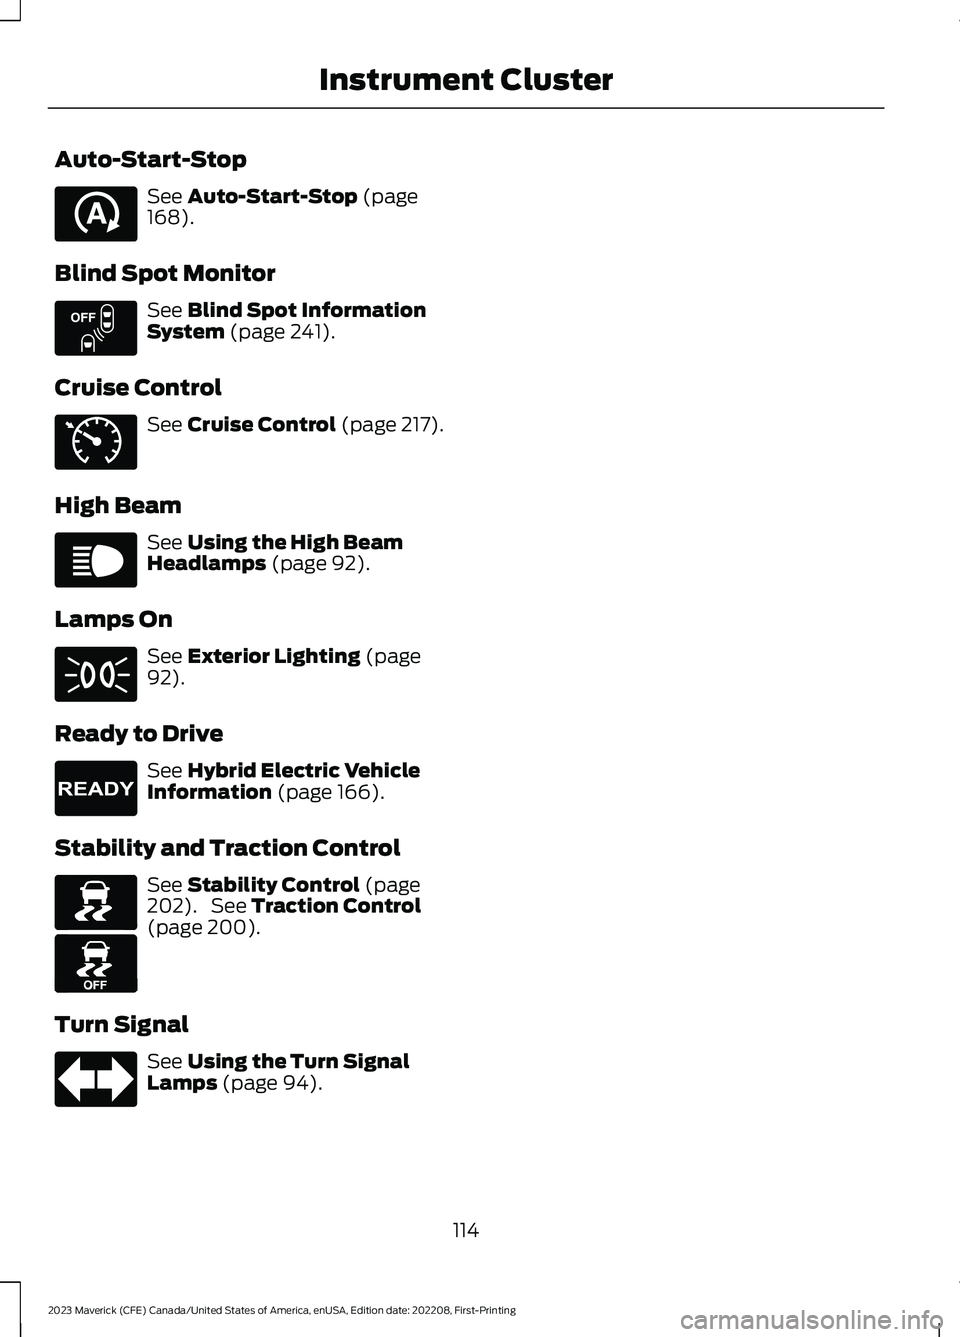 FORD MAVERICK 2023  Owners Manual Auto-Start-Stop
See Auto-Start-Stop (page168).
Blind Spot Monitor
See Blind Spot InformationSystem (page 241).
Cruise Control
See Cruise Control (page 217).
High Beam
See Using the High BeamHeadlamps 